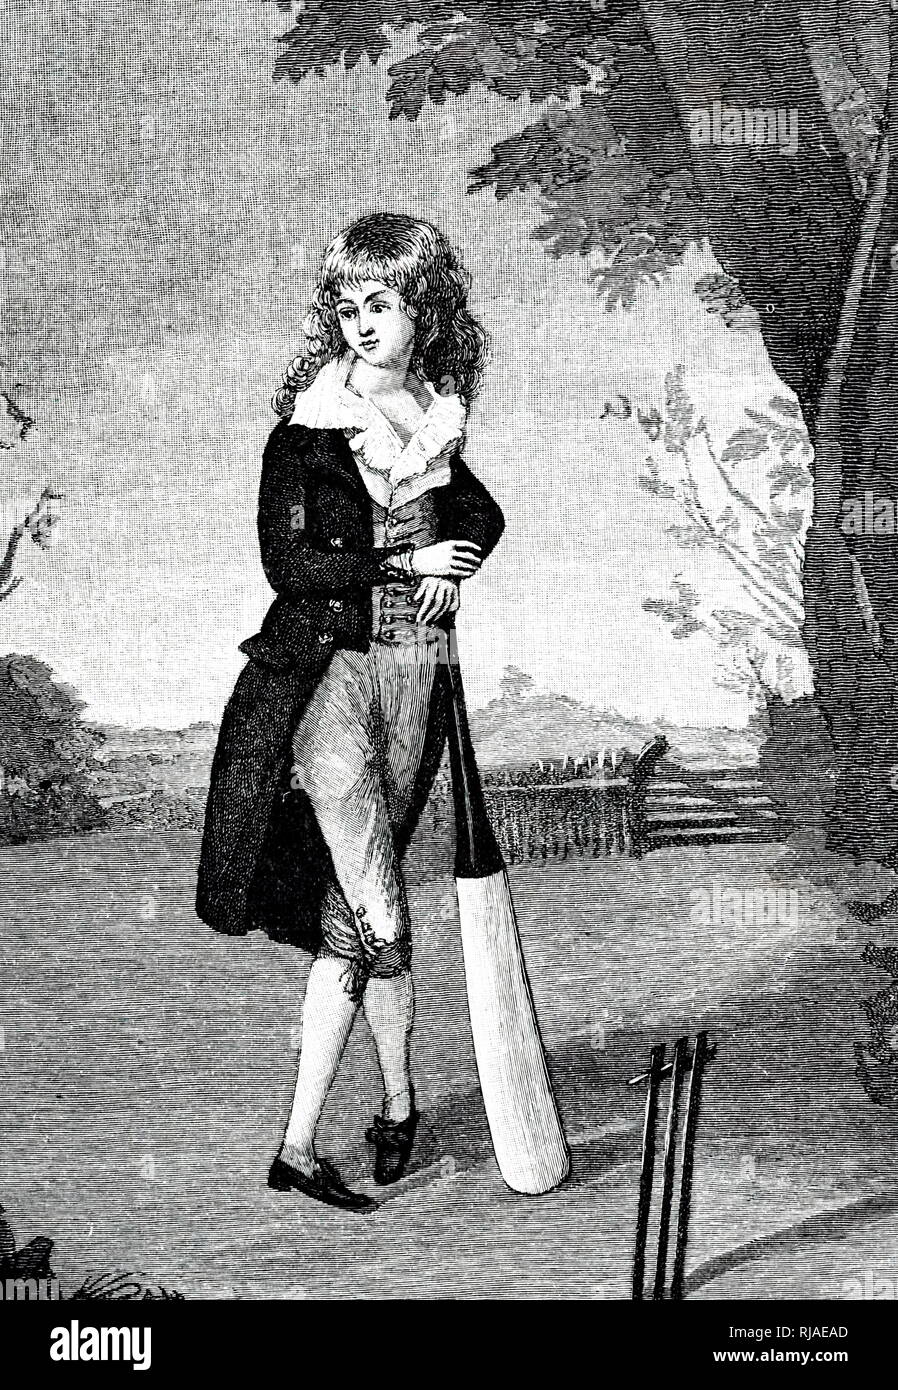 An engraving depicting a young cricketer. Dated 19th century Stock Photo